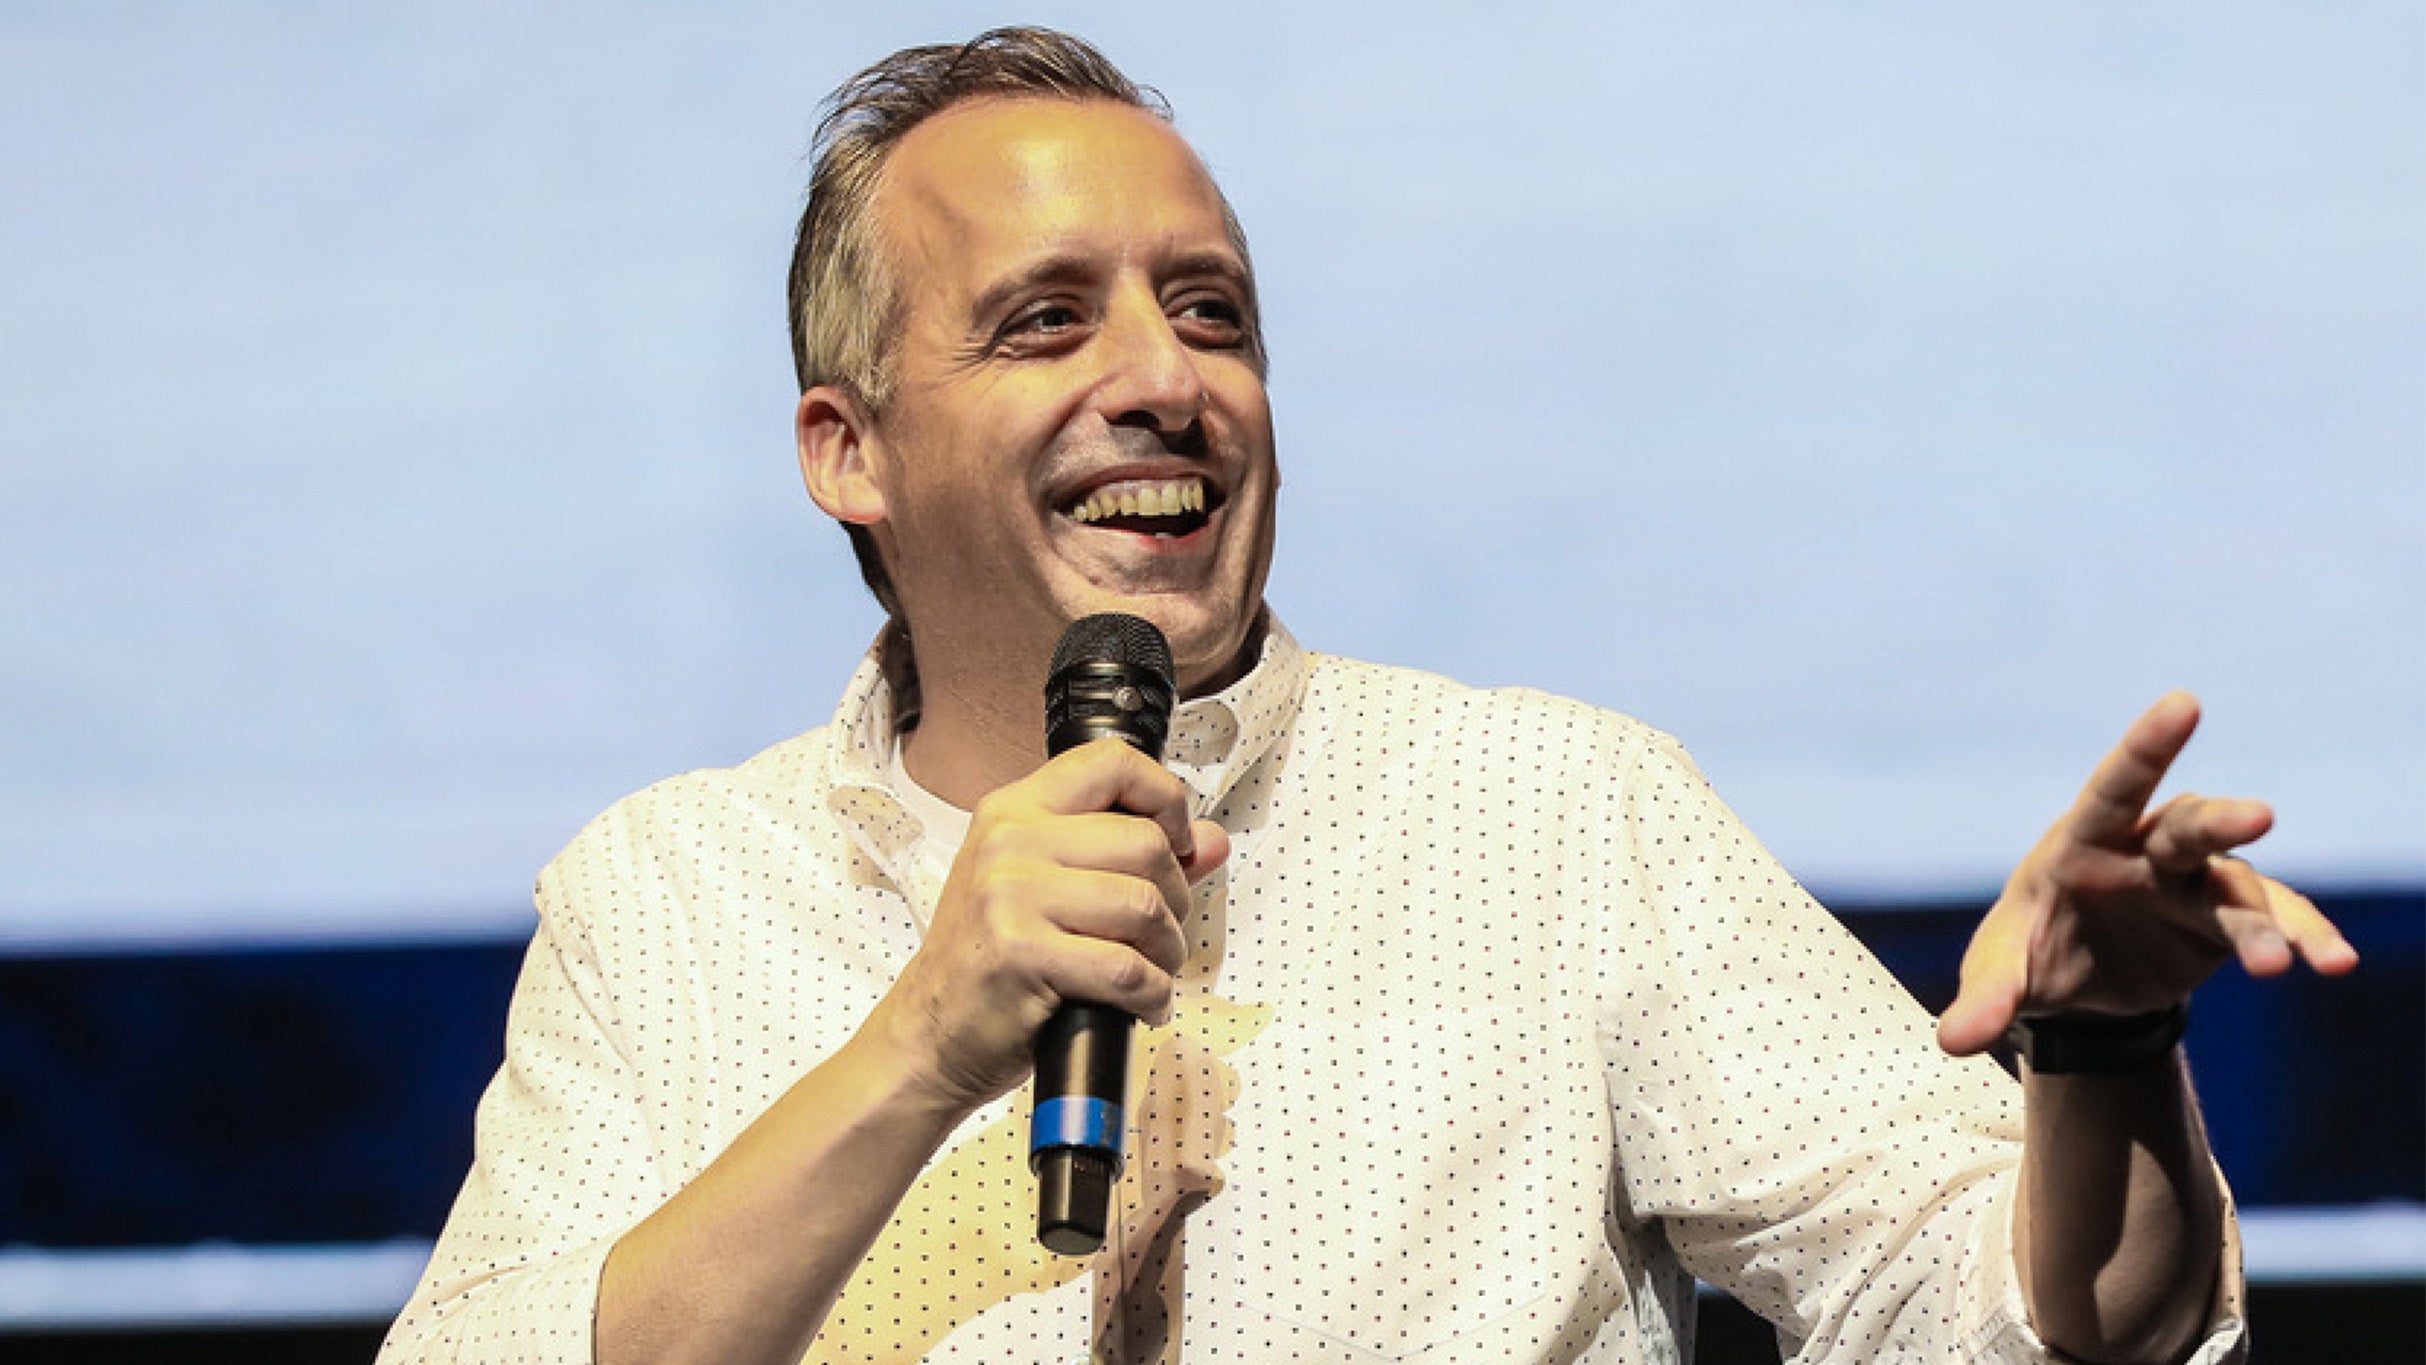 Joe Gatto's Night Of Comedy in Huntington promo photo for Official Platinum presale offer code